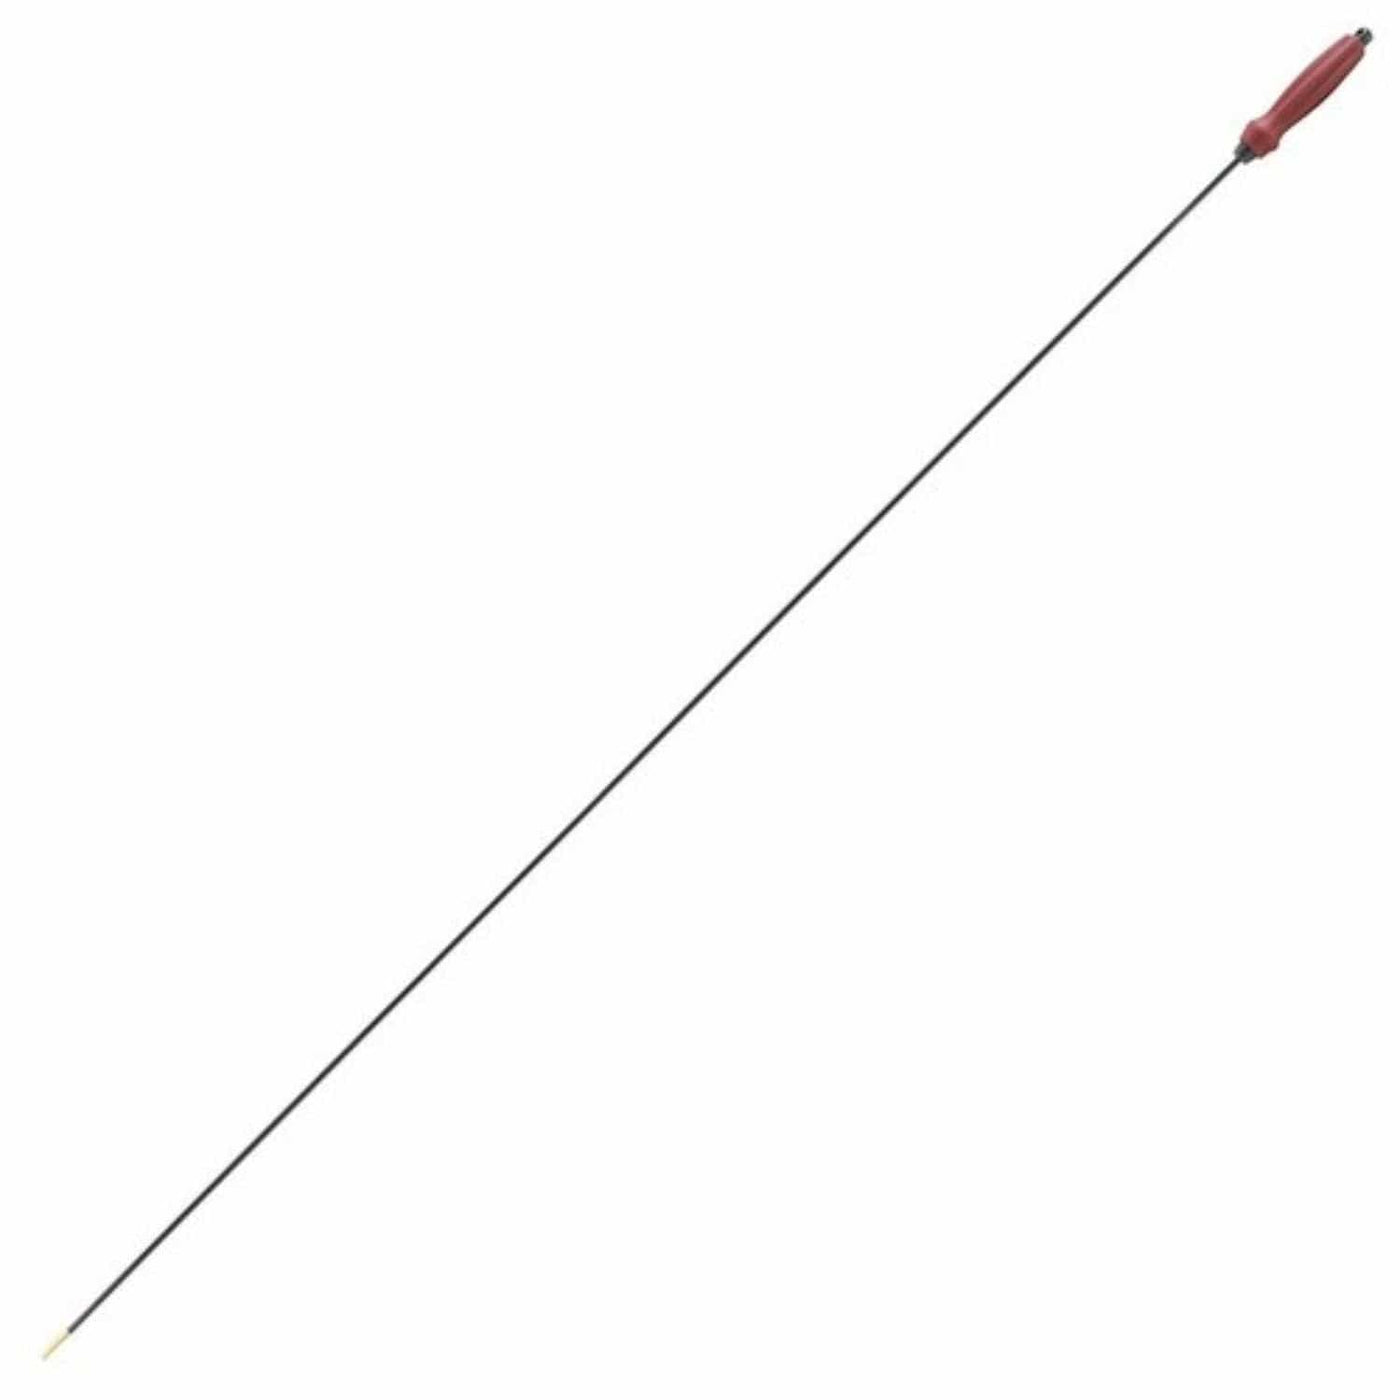 Tipton Tipton Deluxe 1 Pc CF Cleaning Rod 27 to 45 Cal 44 in Shooting